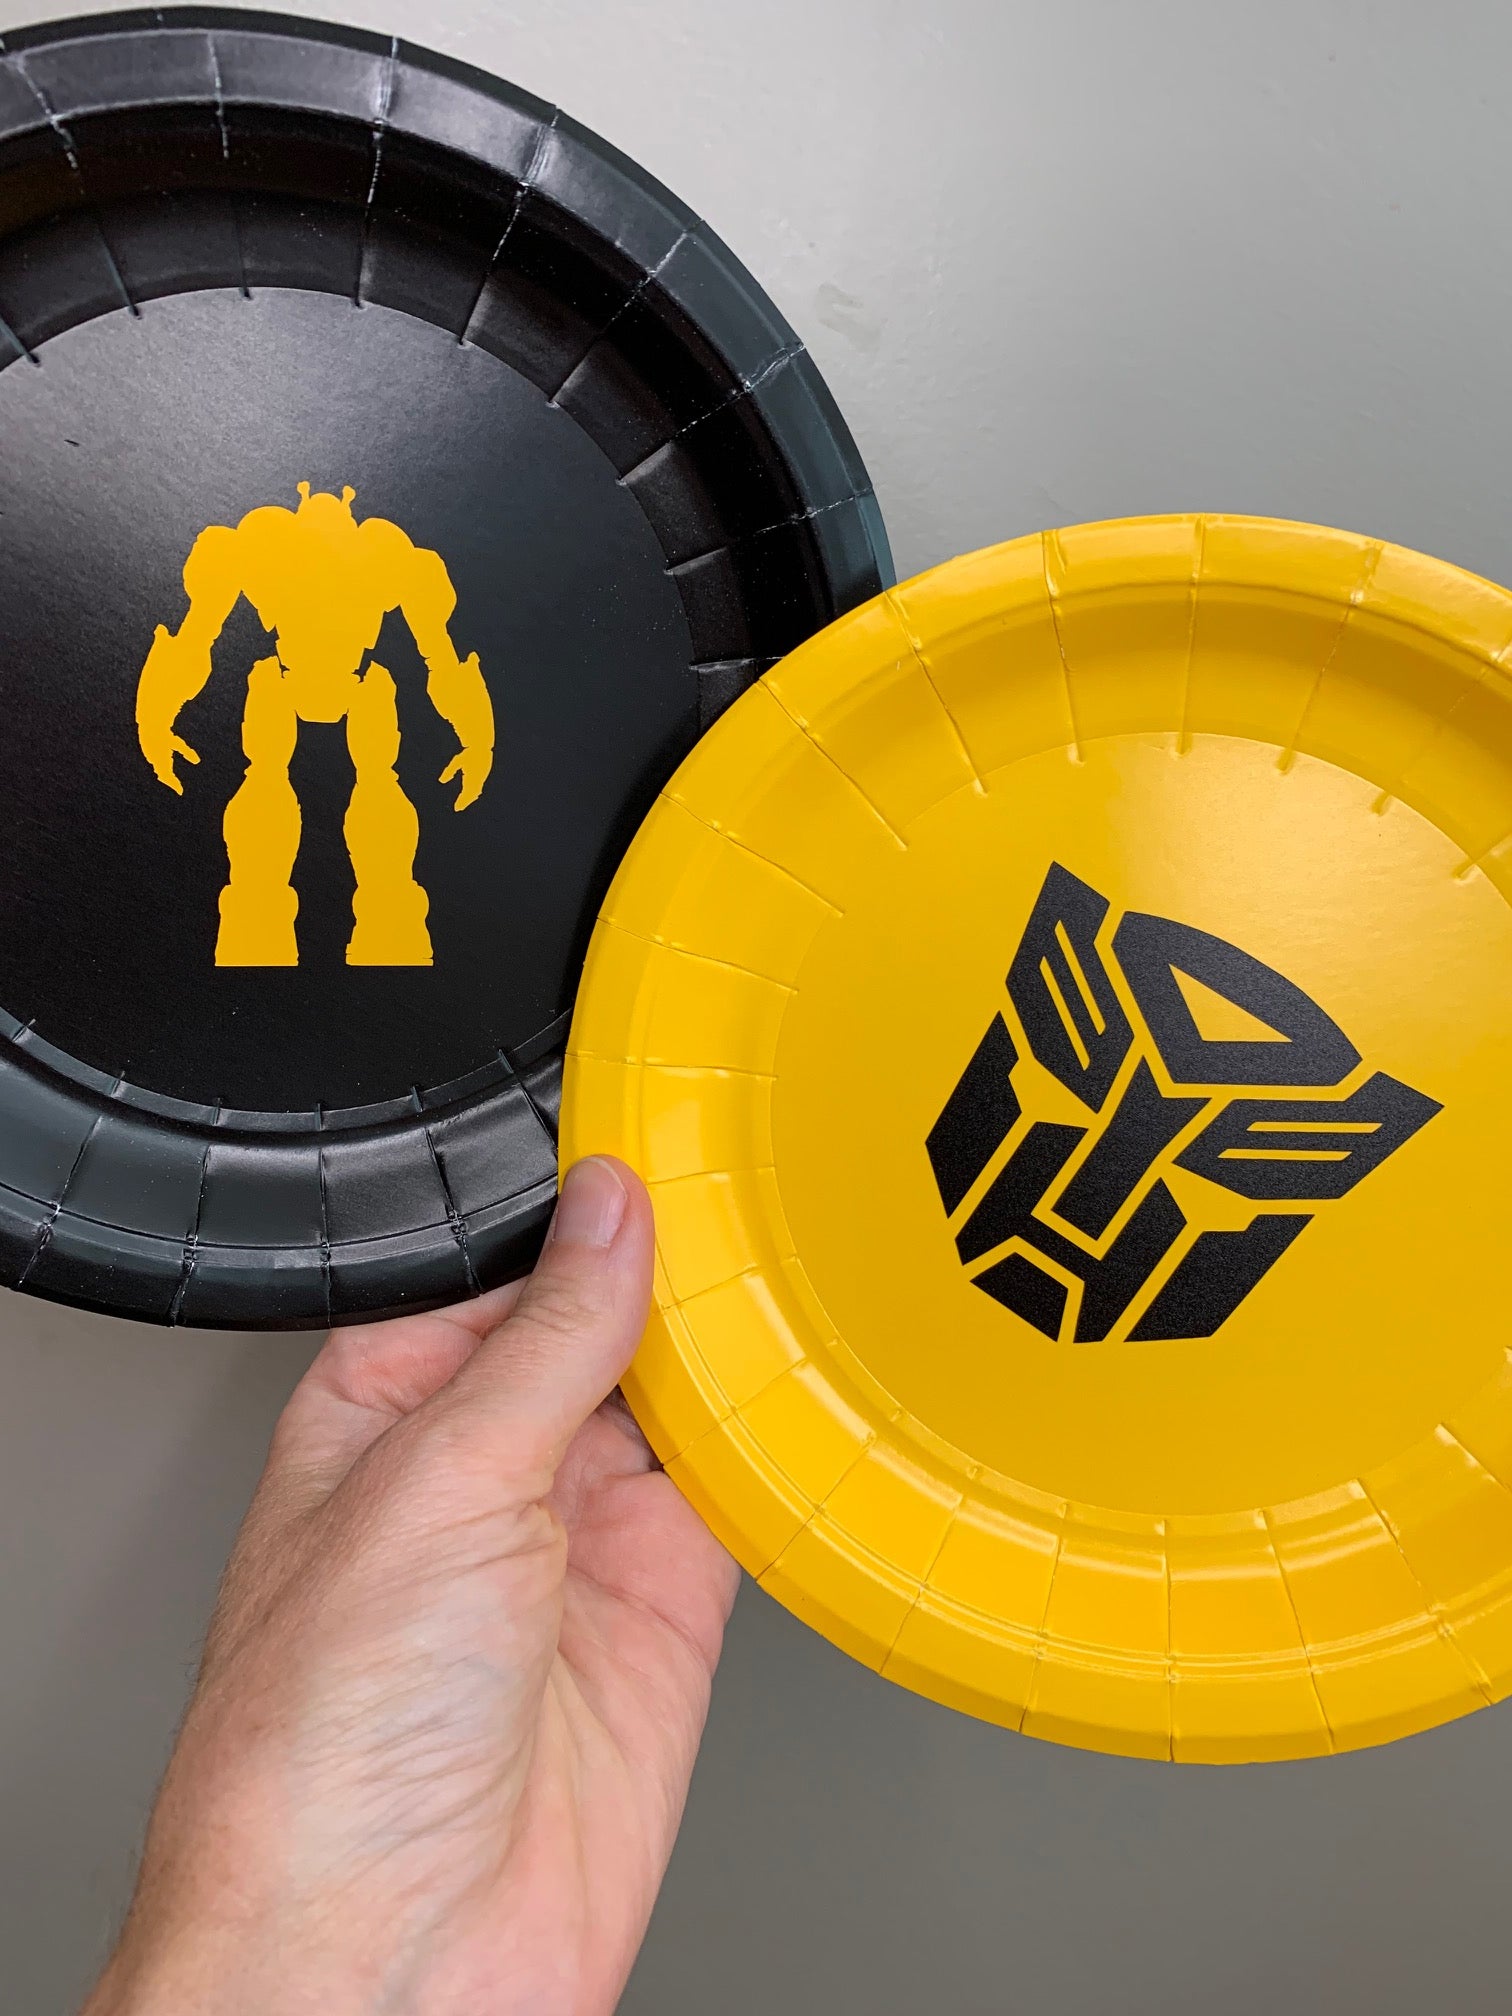 Transformers party plates